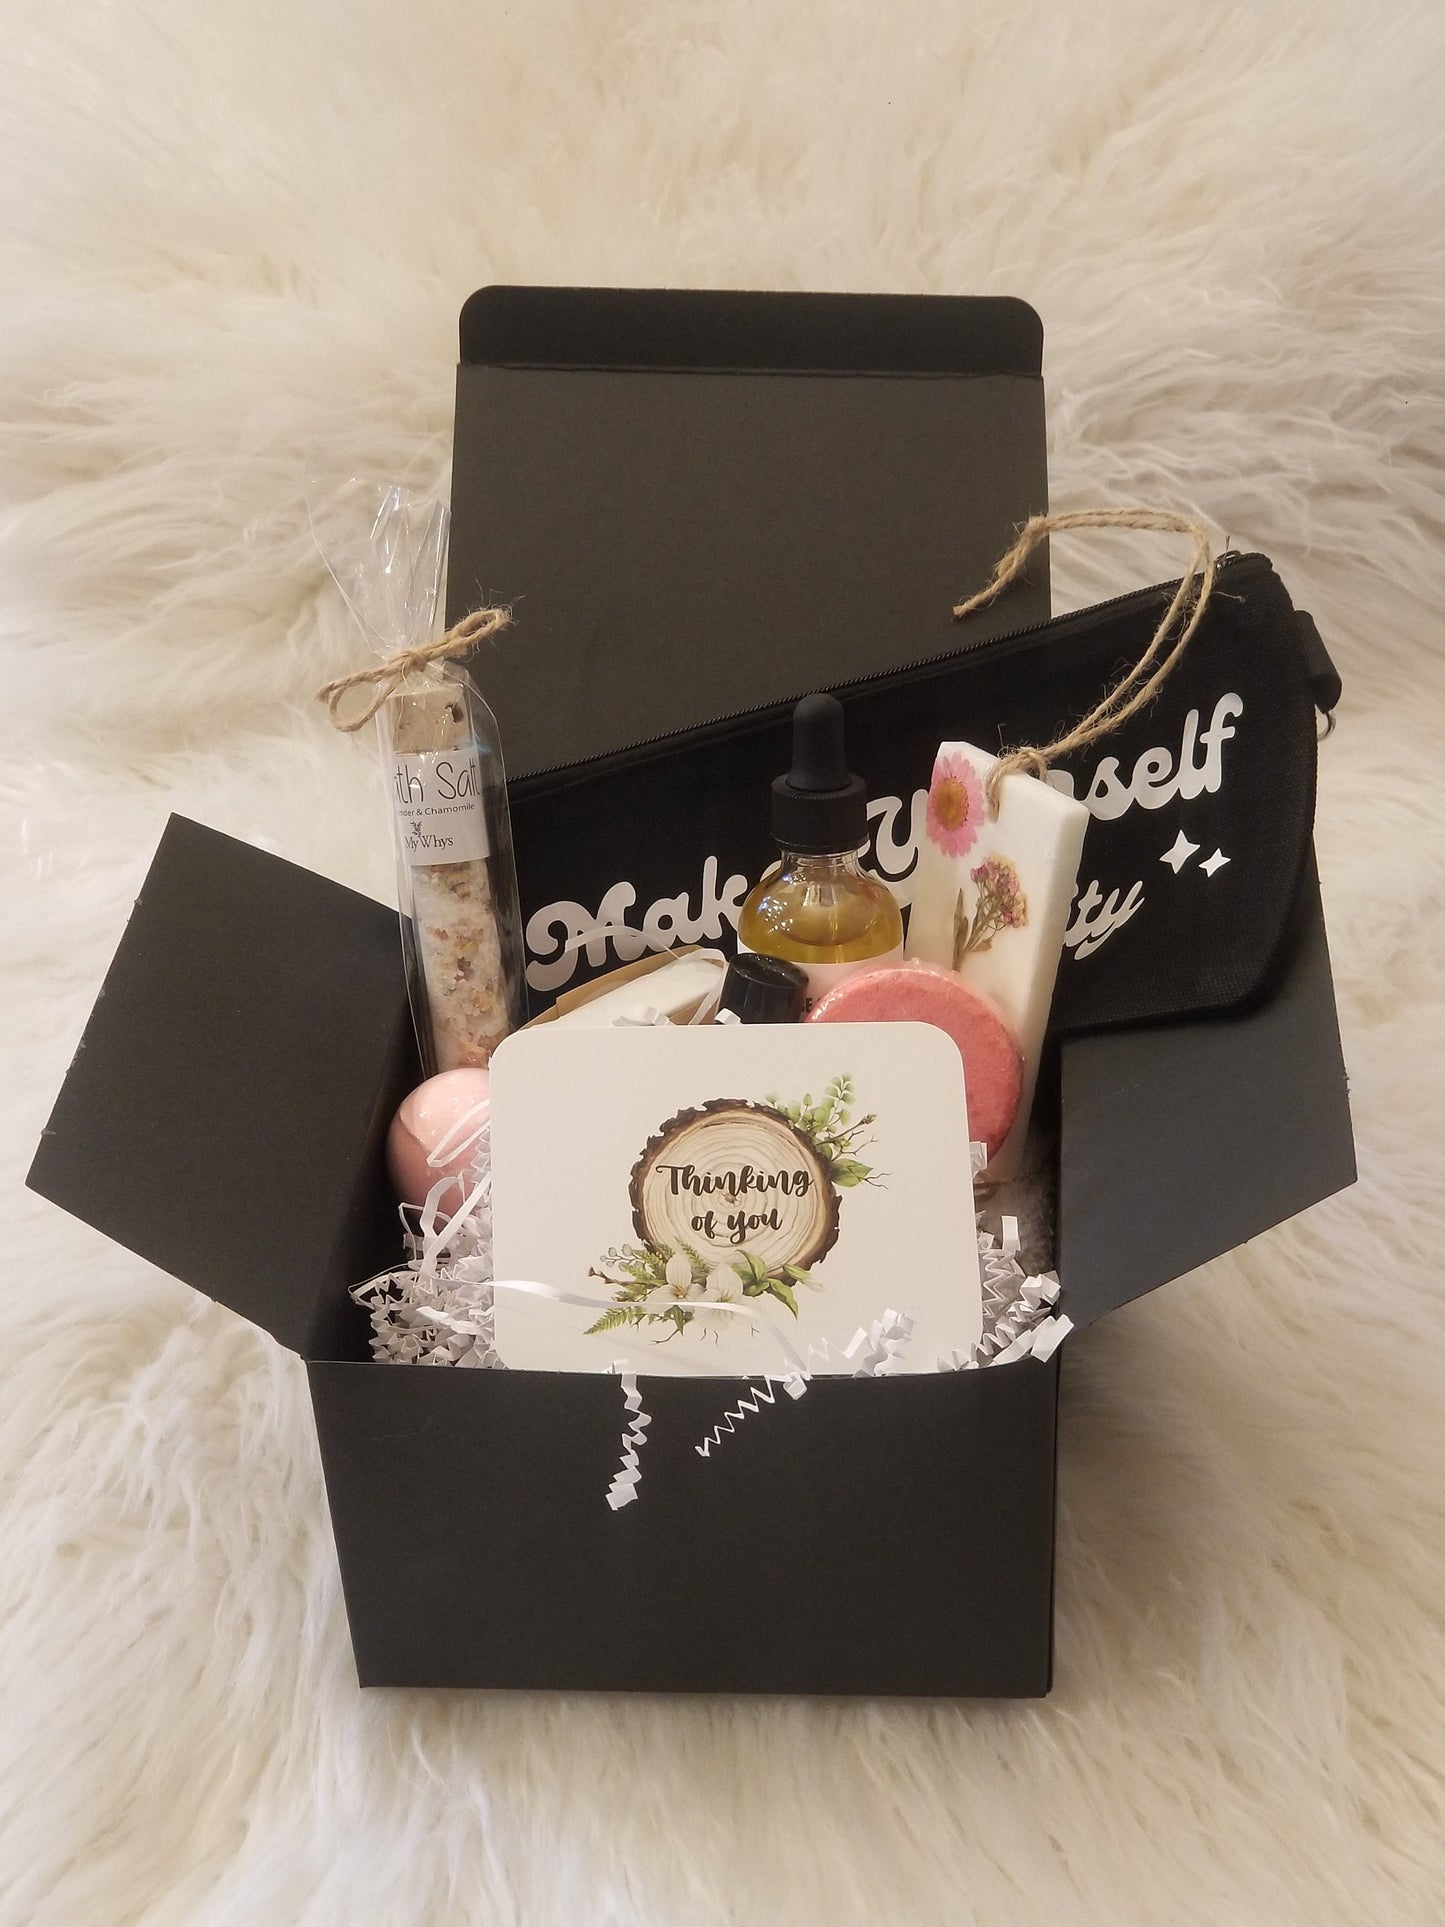 Make yourself a priority - Sweet 16 Spa gift set, pampering care package